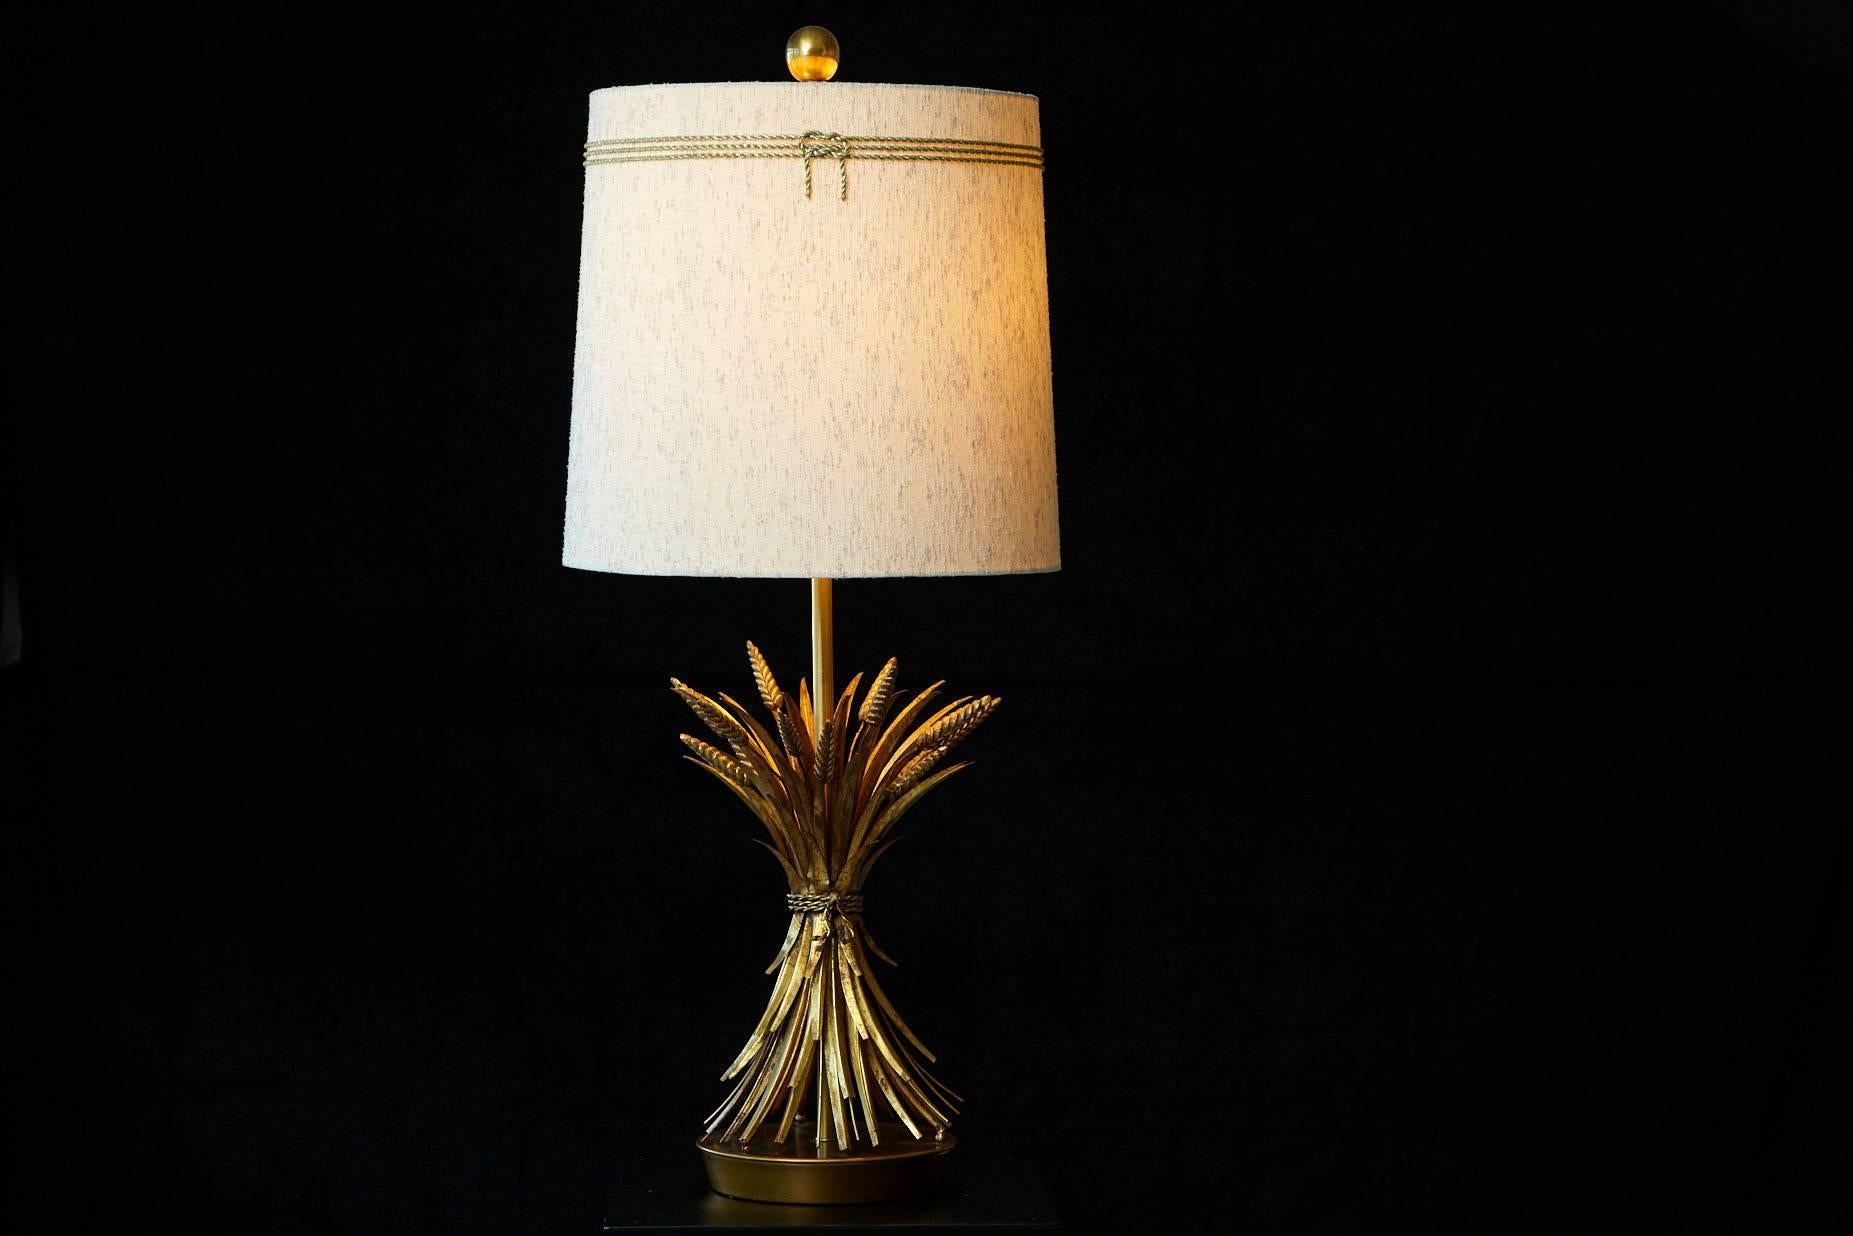 Brass Sheaf of Wheat Gilt Metal Table Lamp by Mabro, Lamp 2